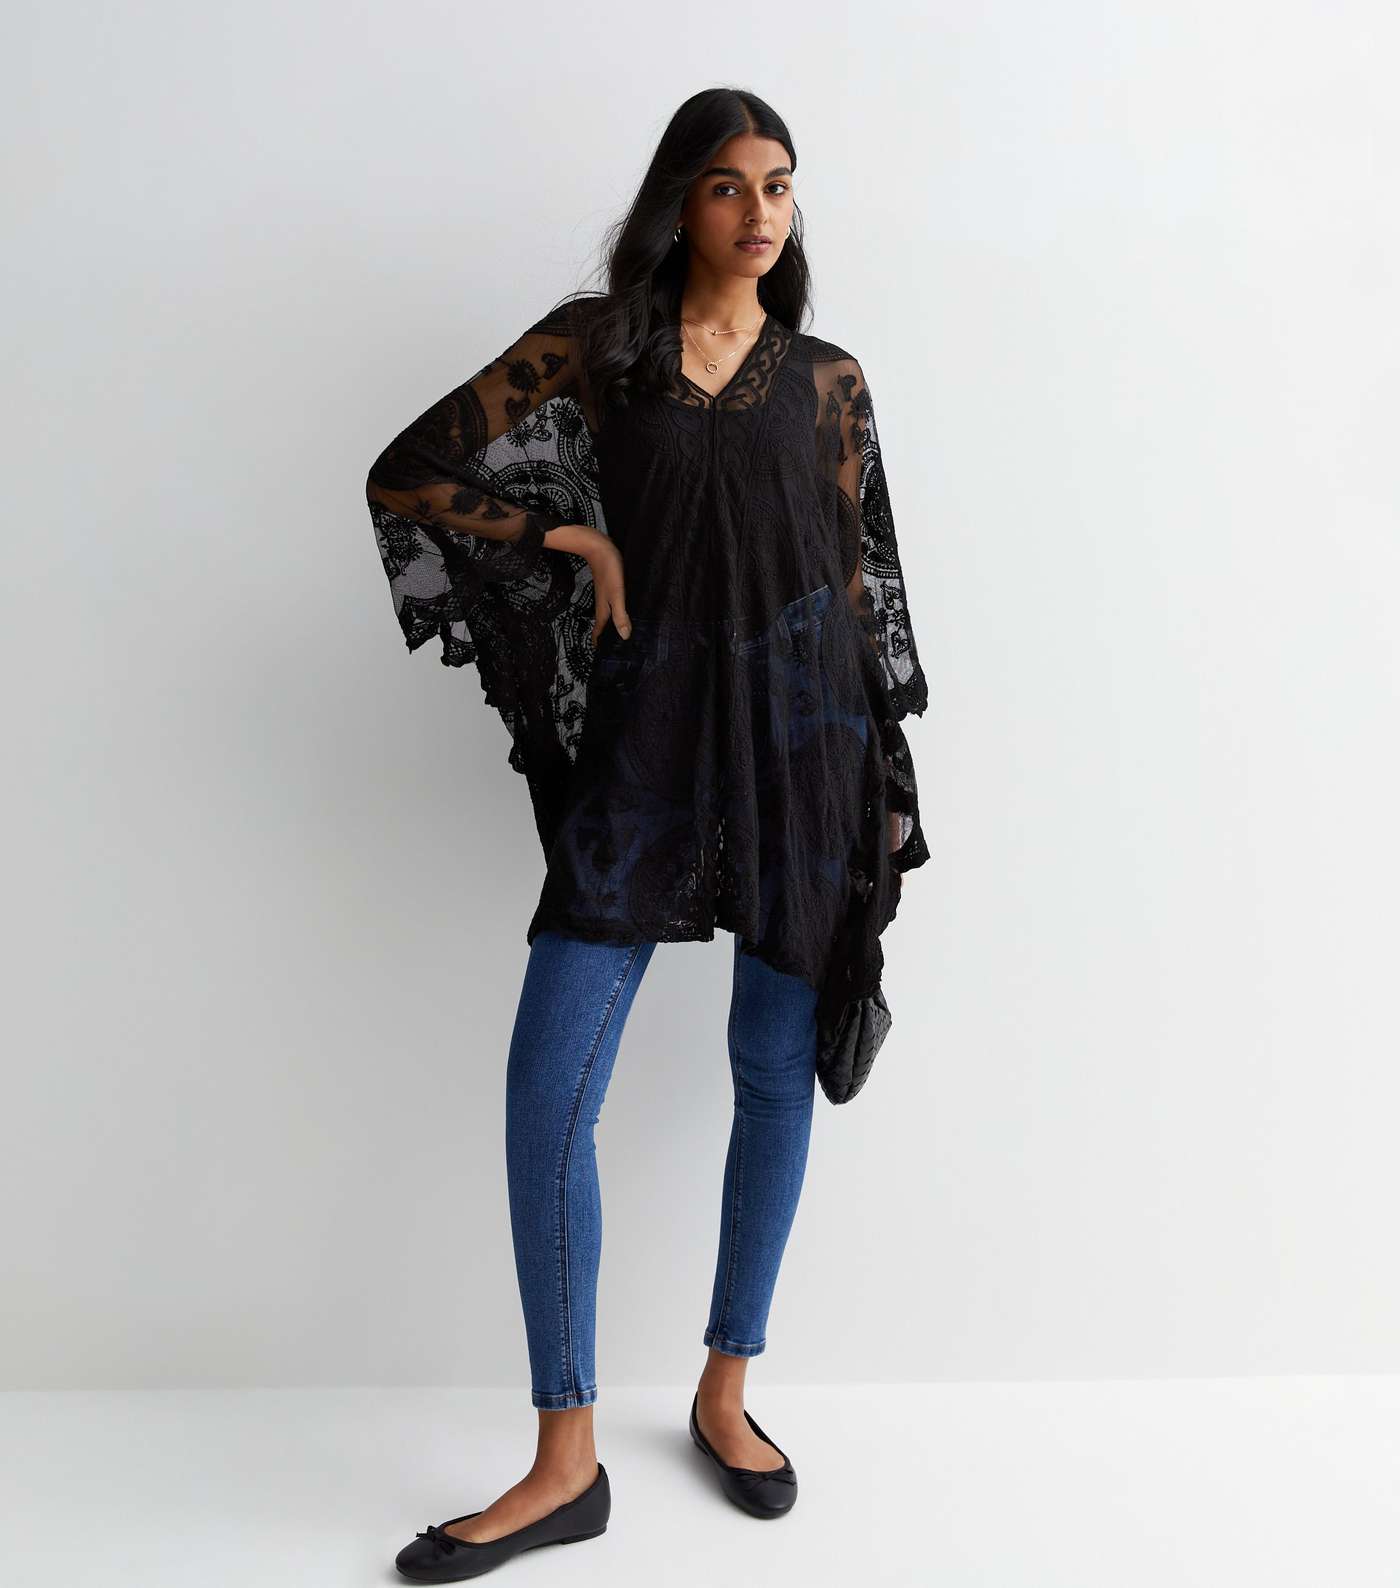 Gini London Black Embroidered Crochet Knit Top Image 2